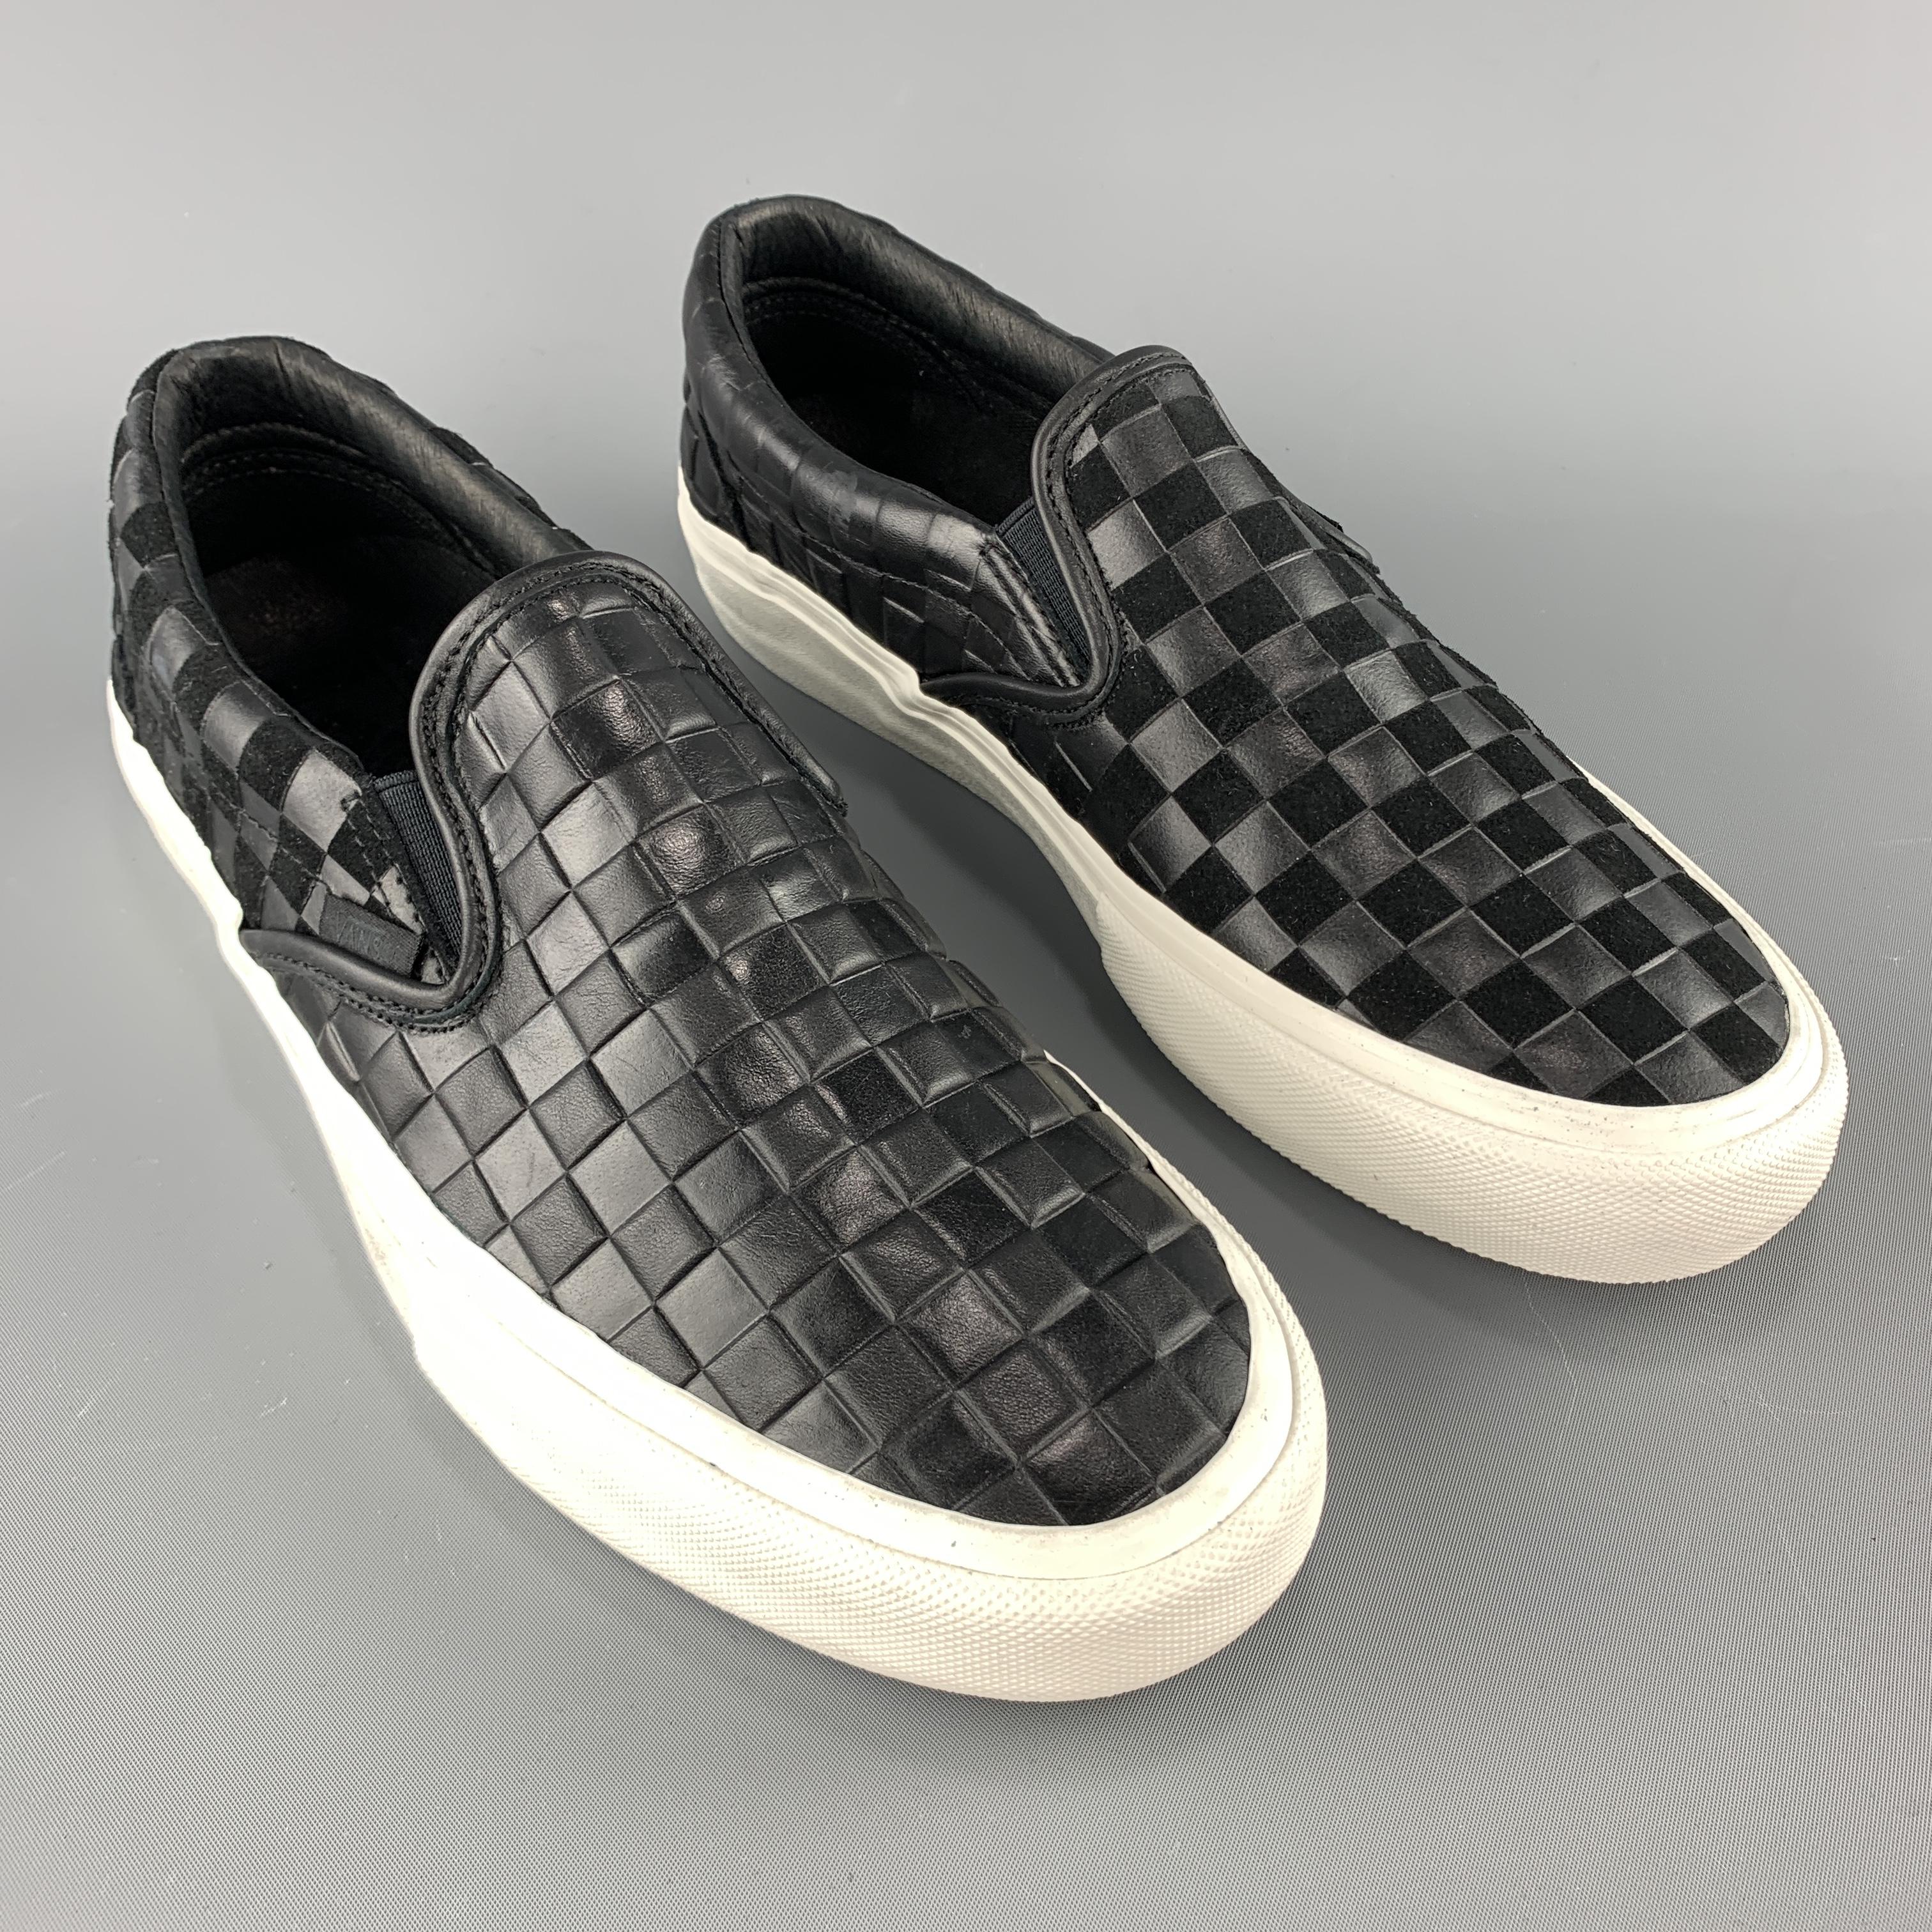 VANS x ENGINEERED GARMENTS Spring Summer 2019 slip on sneakers come in black checkered embossed leather with one sueded front panel,  one sueded heel panel, and rubber sole. 

New with Box. 
Marked: 9.5